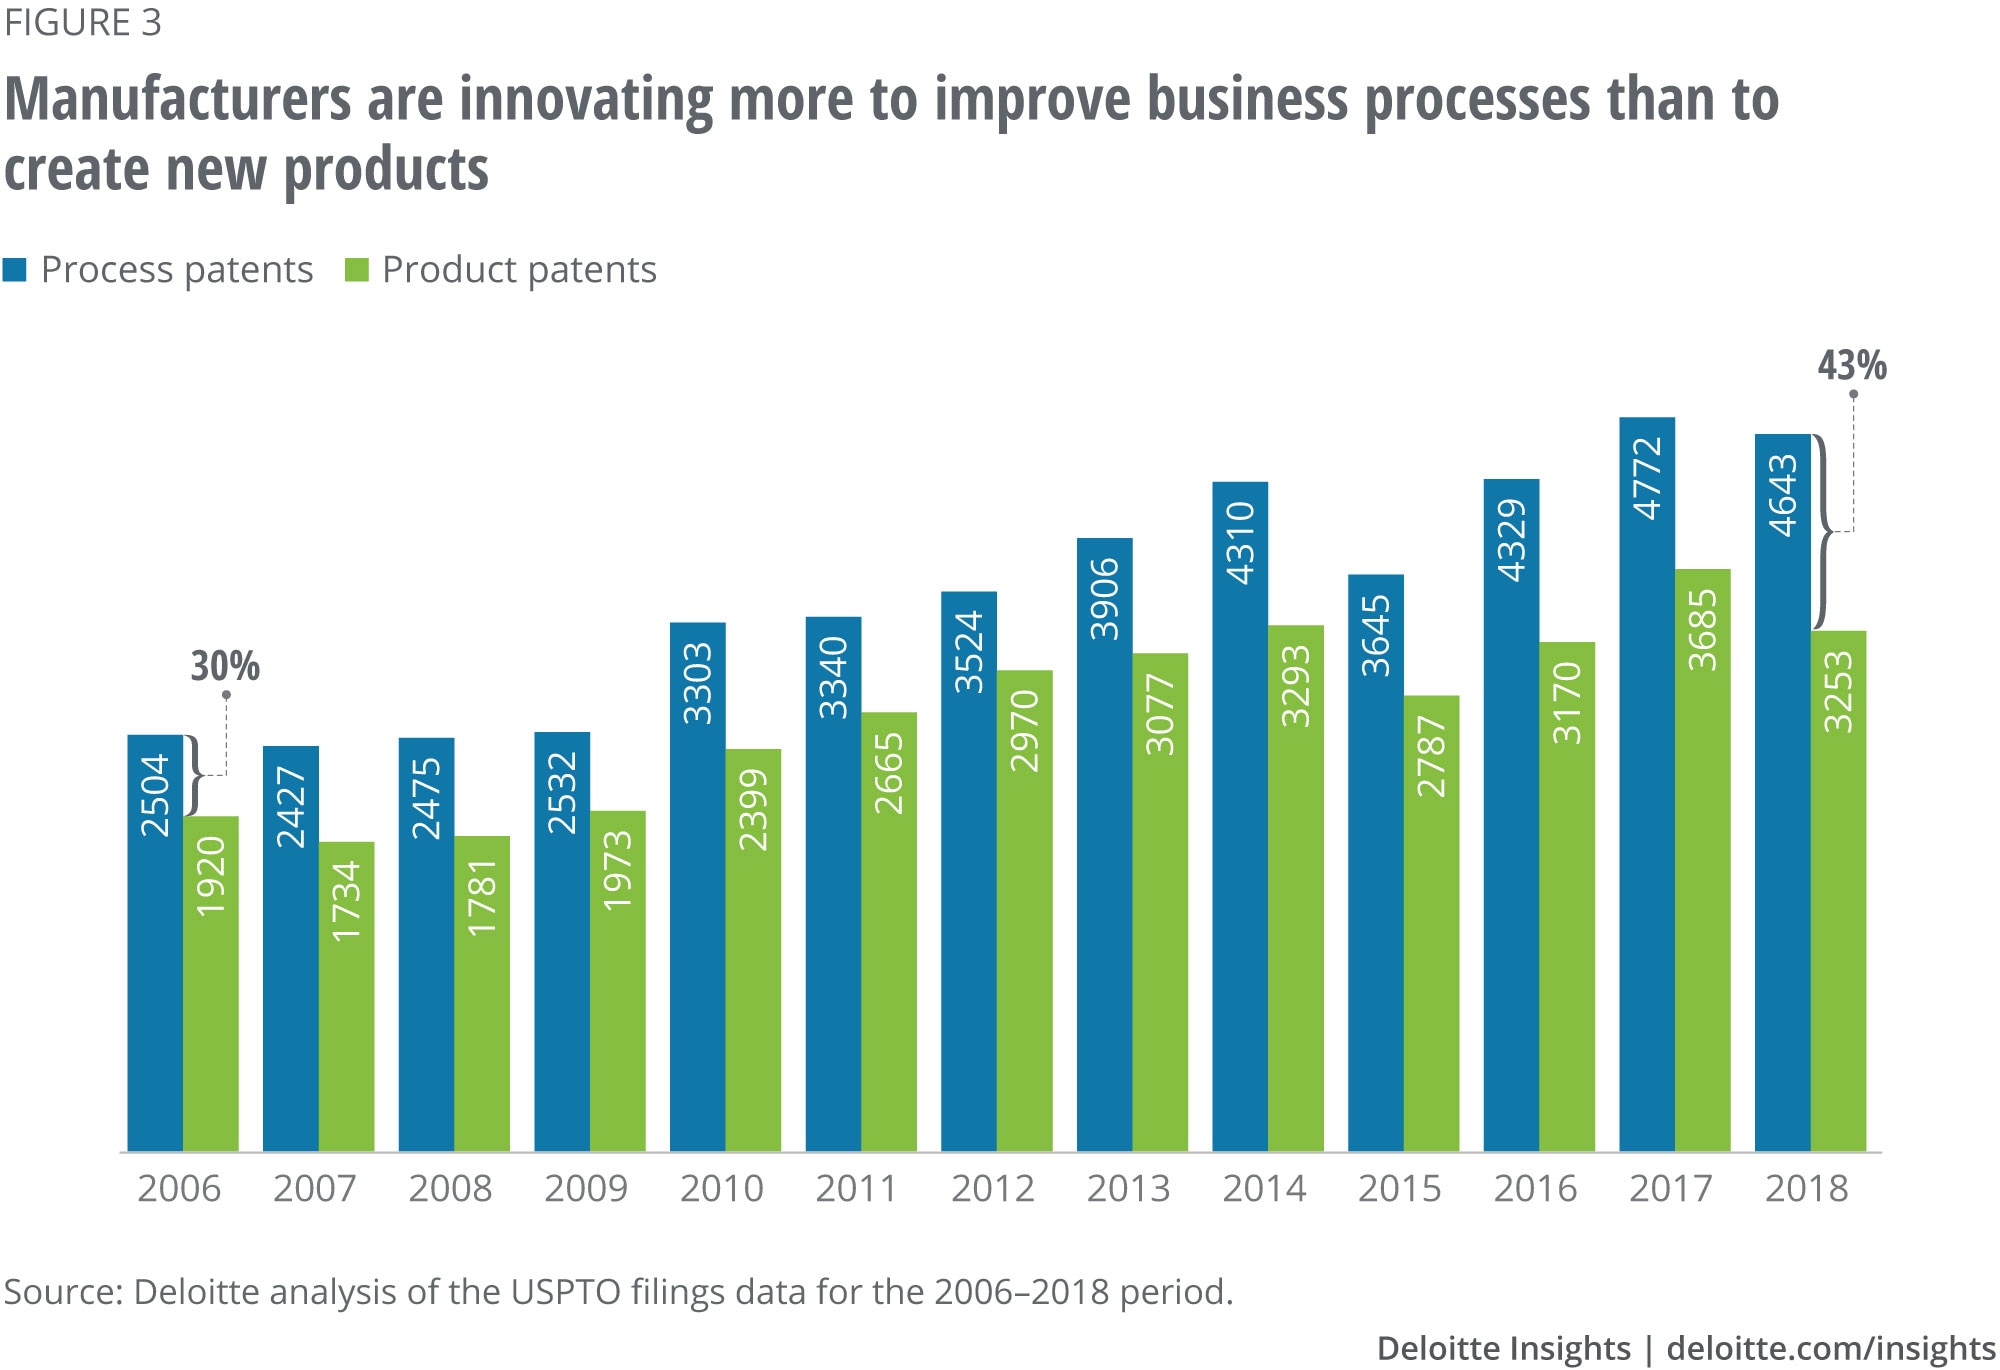 Manufacturers are innovating more to improve business processes than to create new products